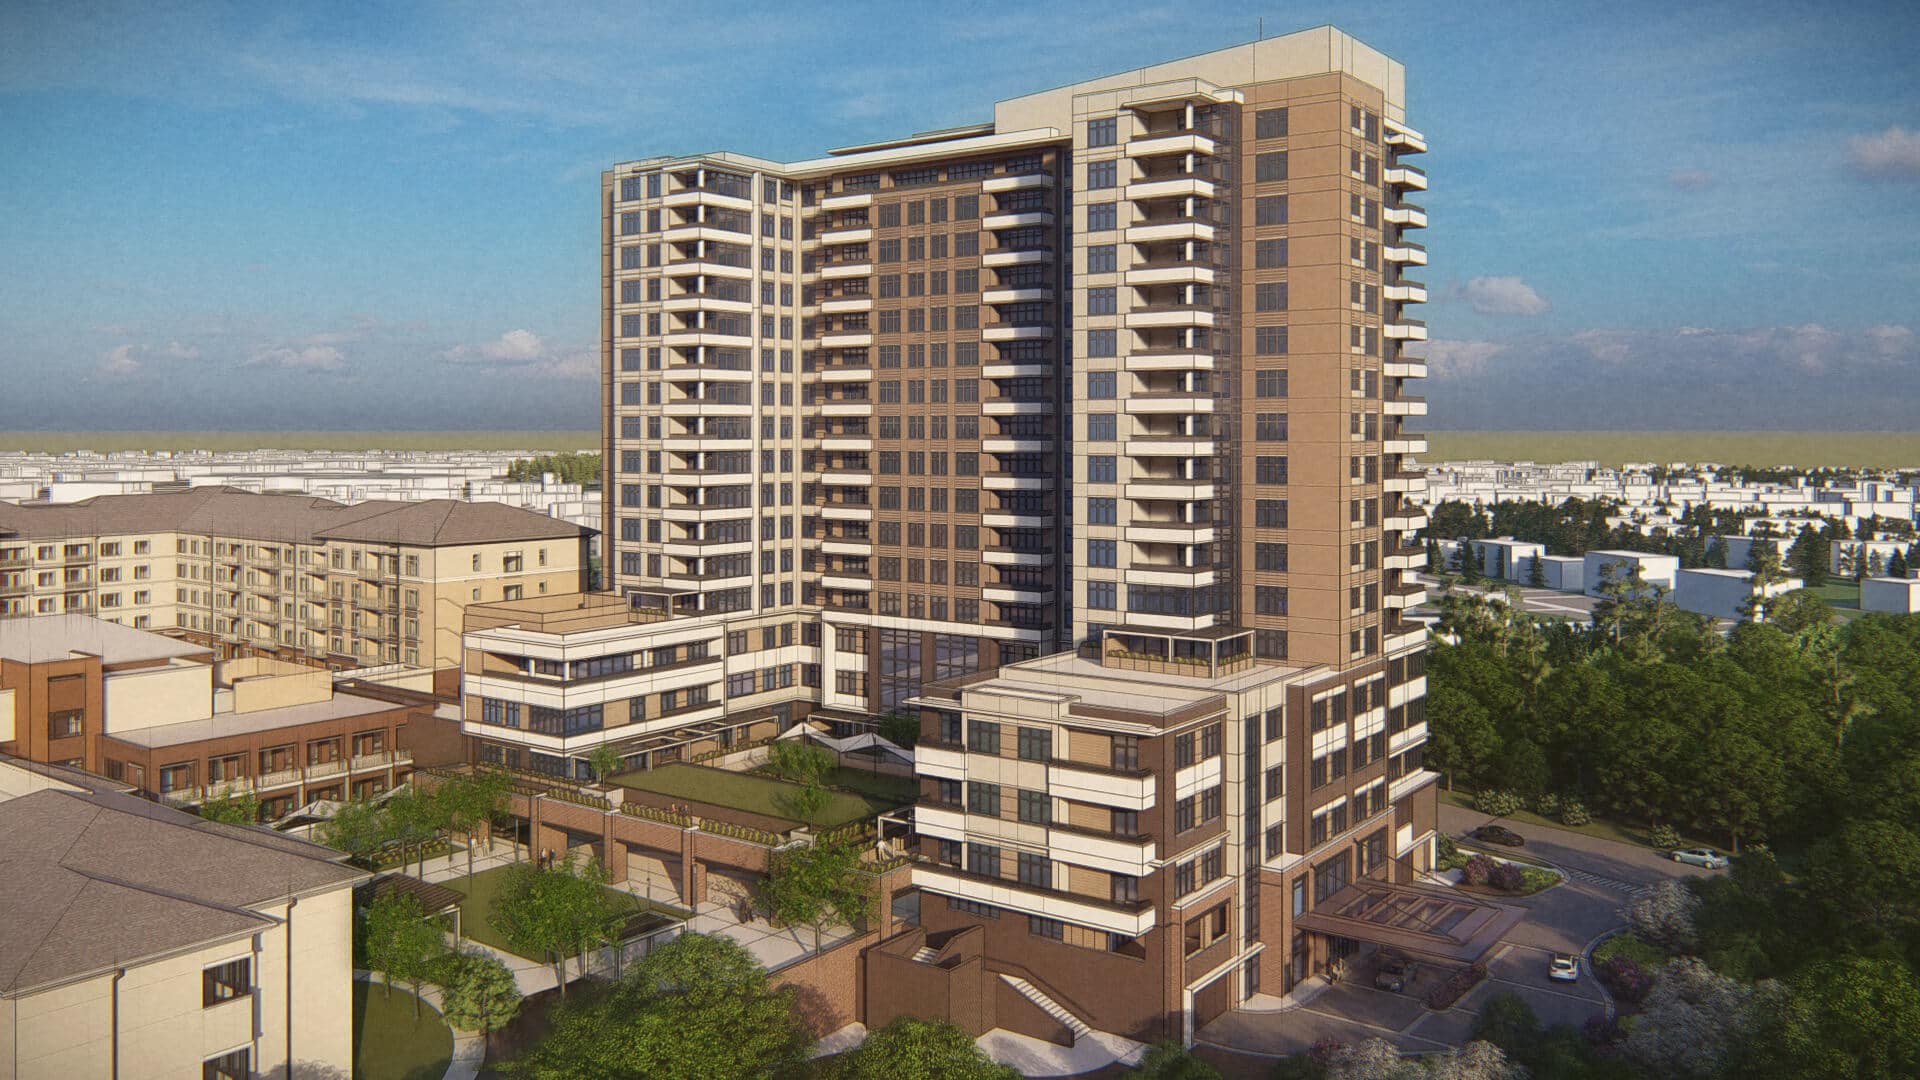 Groundbreaking Ceremony Kicks Off Construction on New High-Rise Addition